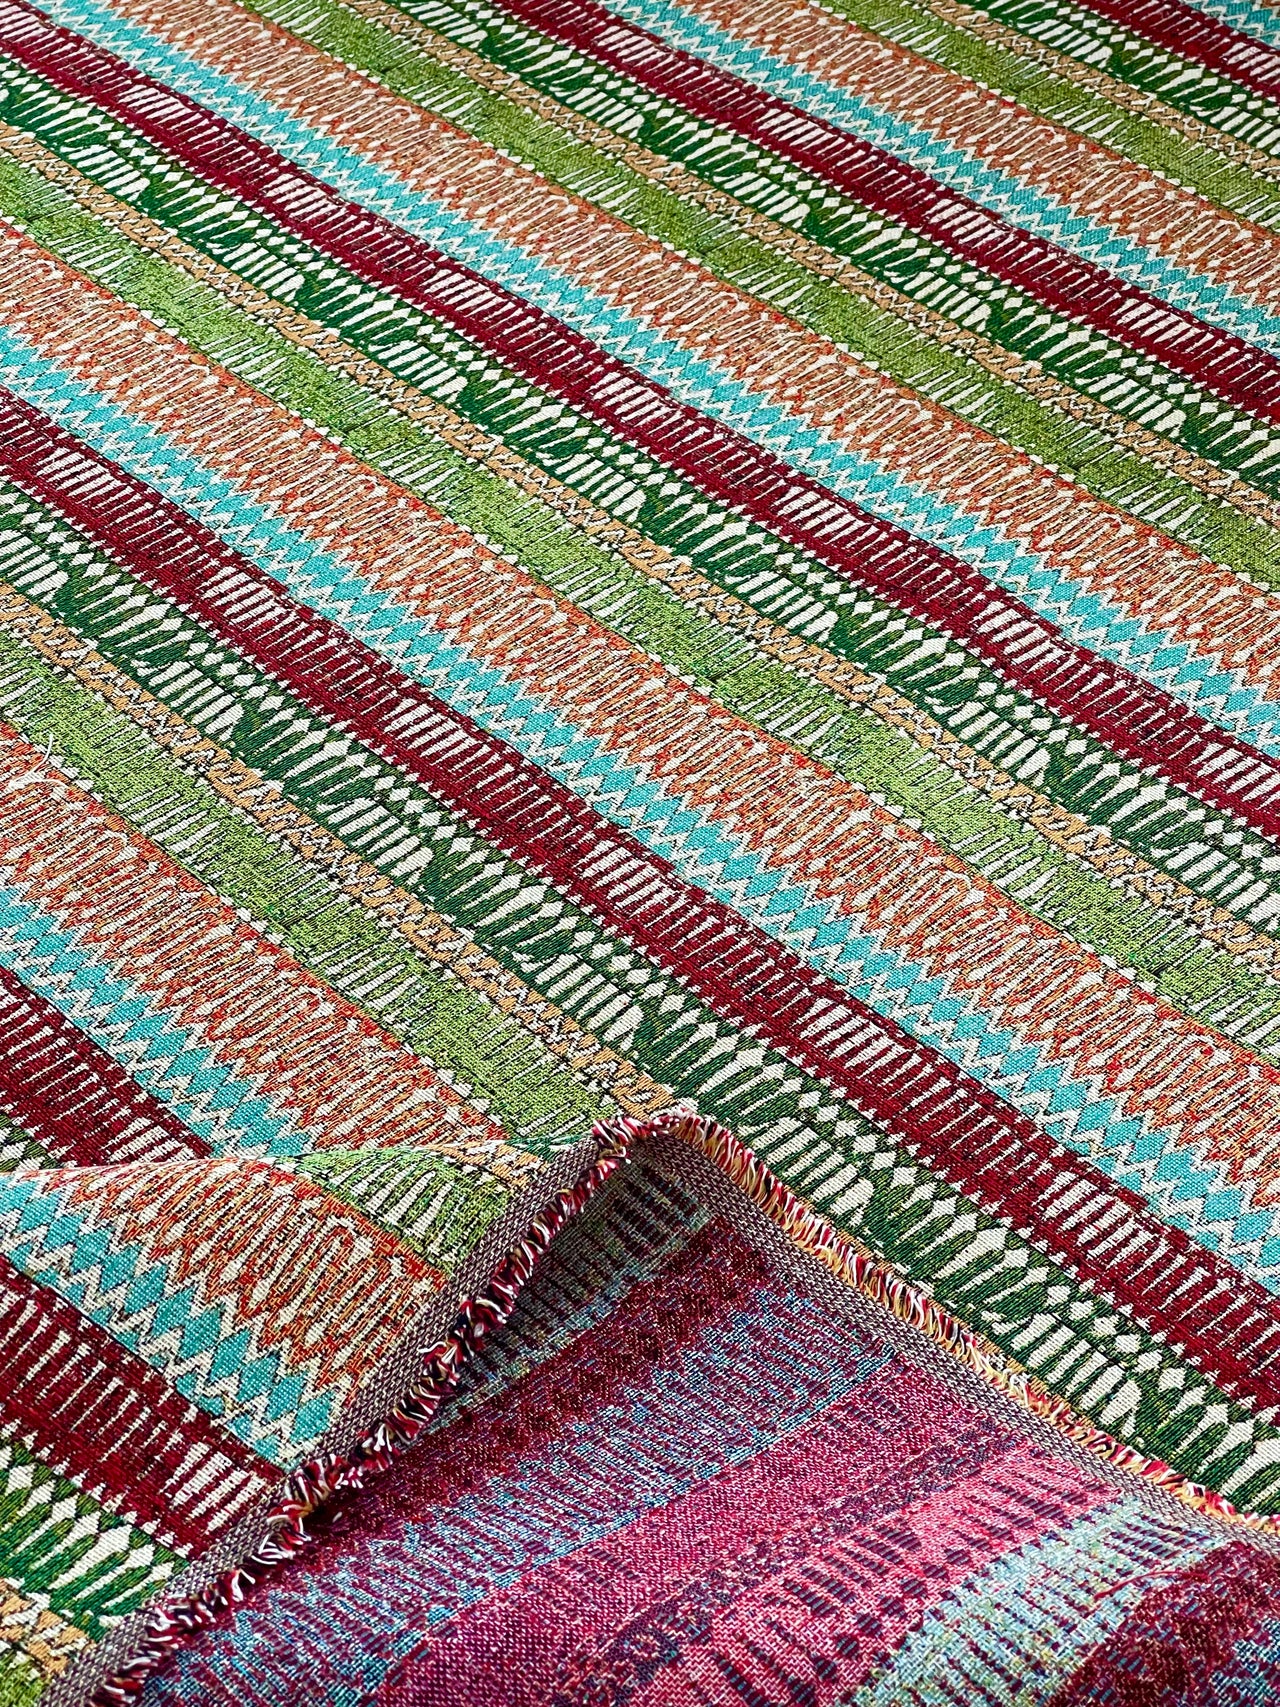 Moroccan-Inspired Kilim Fabric: Cherry Red, Blue, and Green Stripes - Sold by the Metre - Unique Home Decor Textile